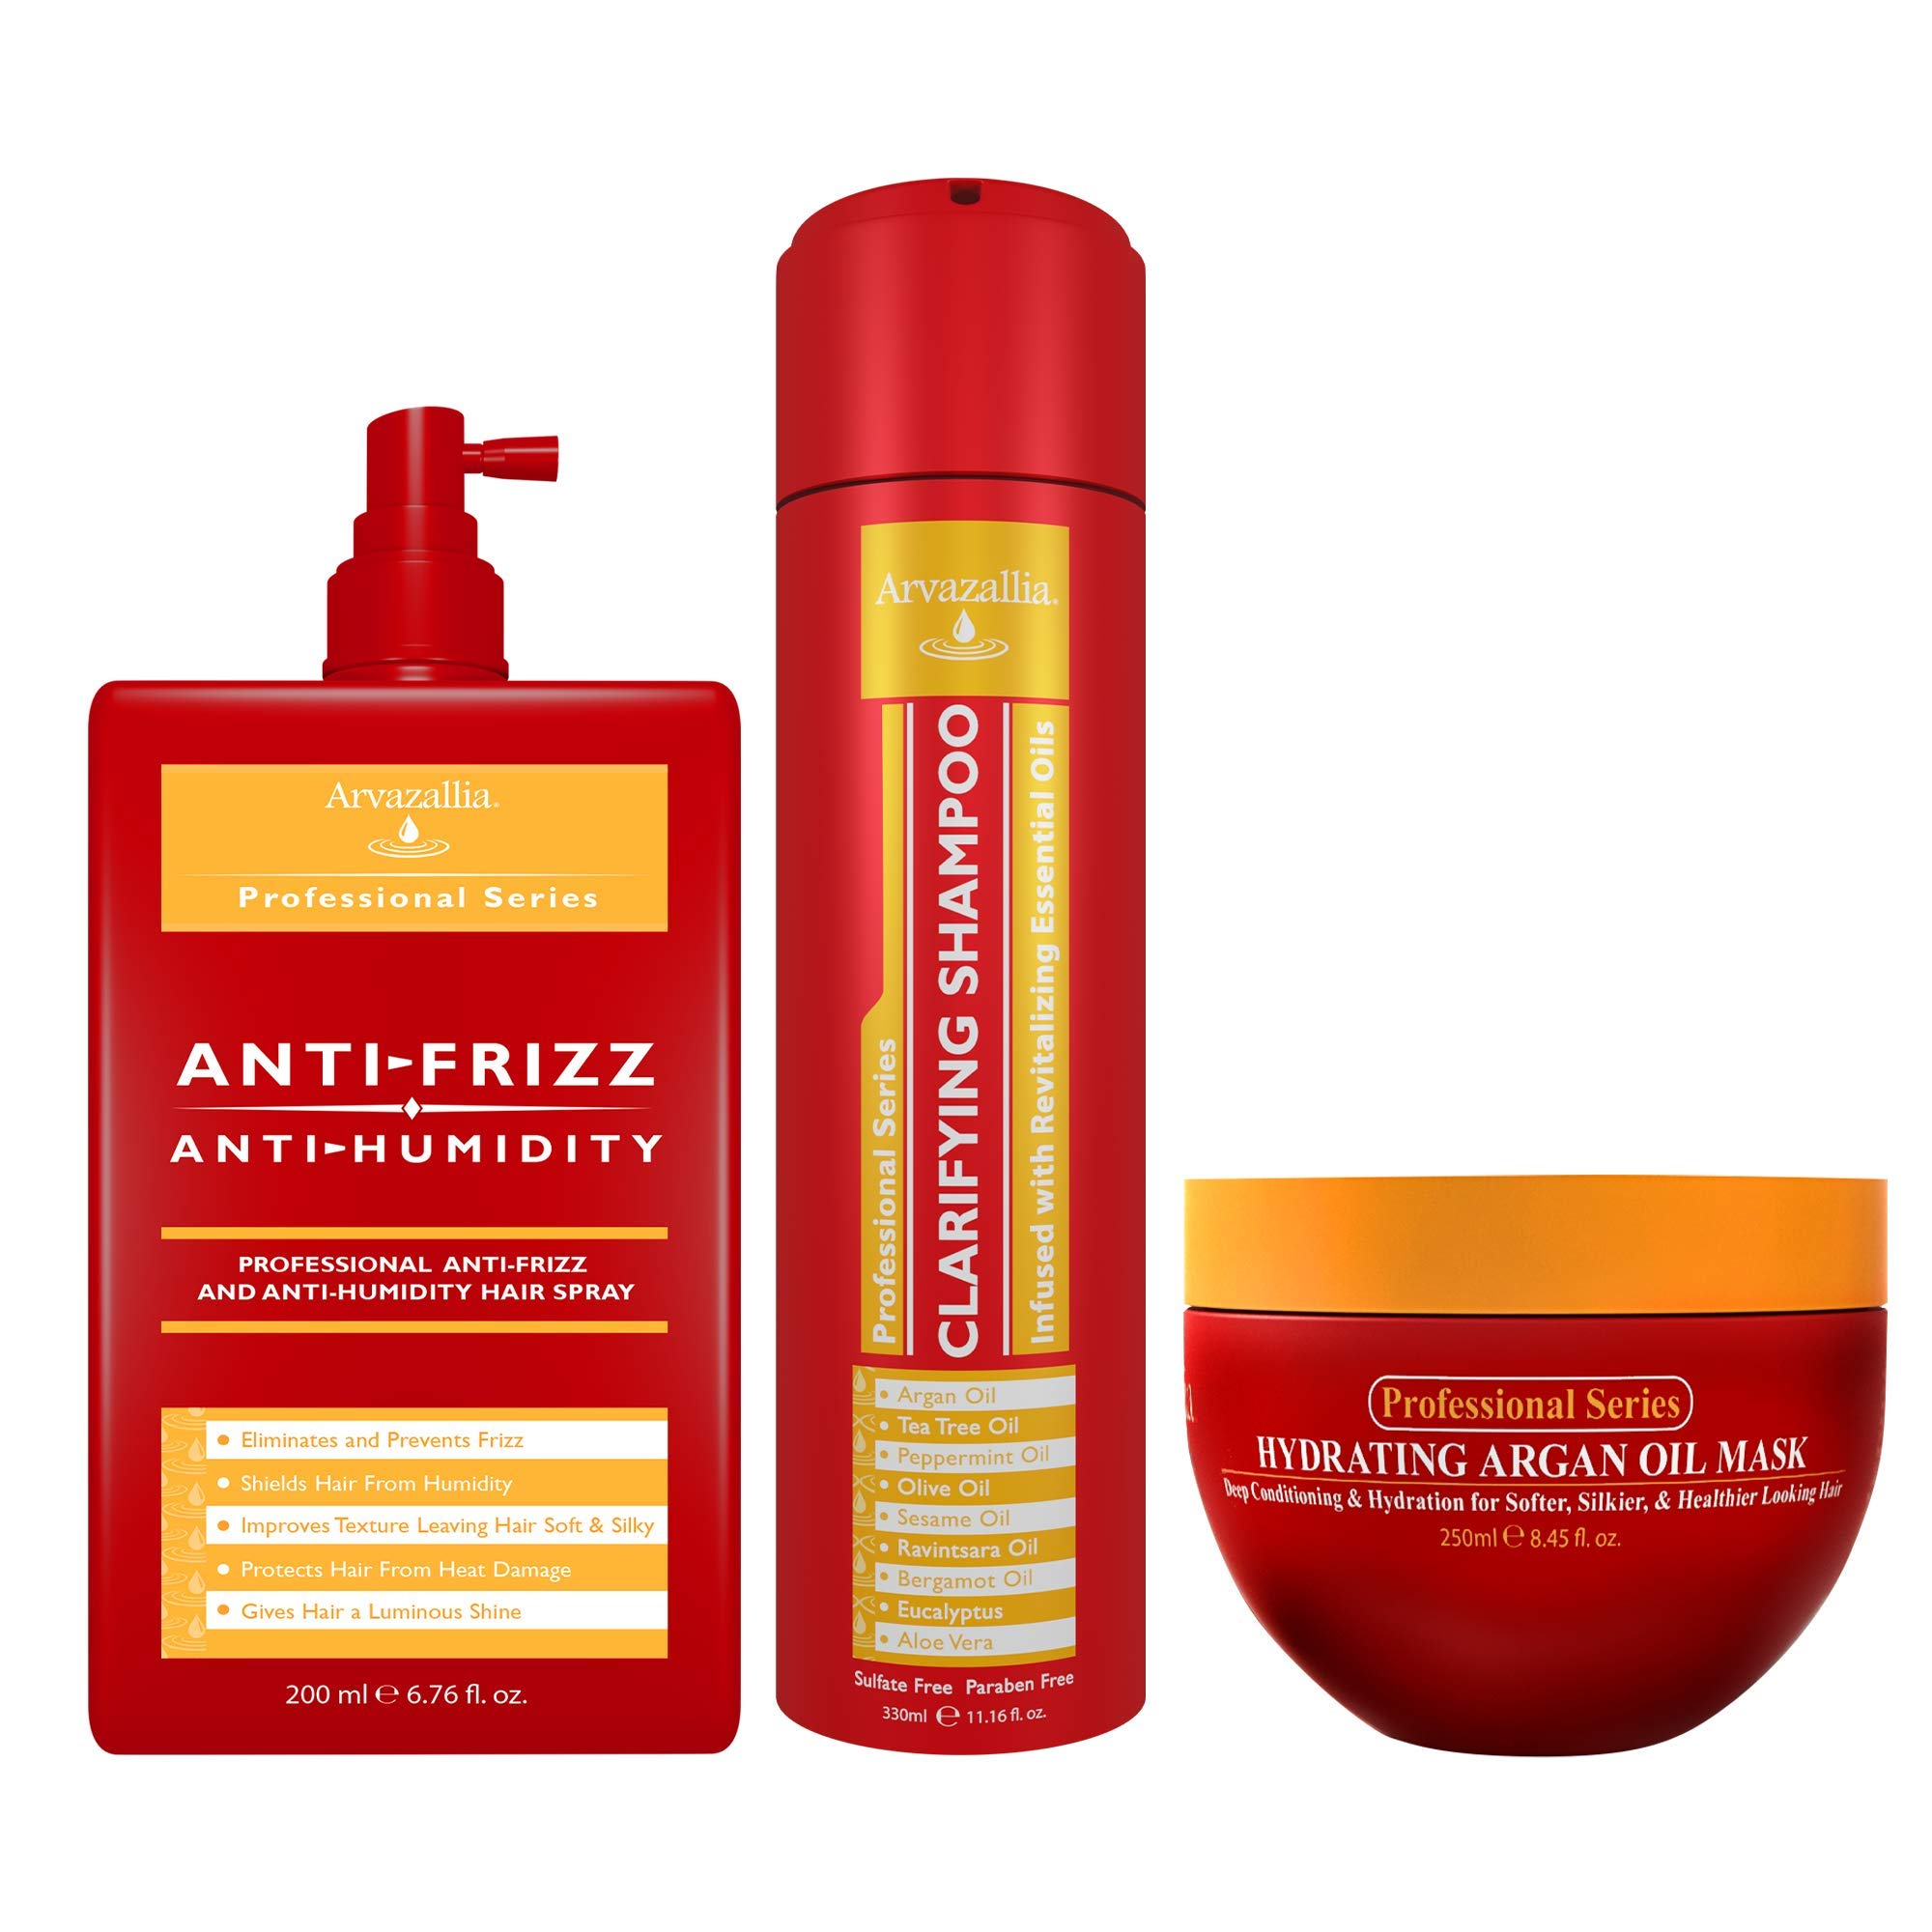 Anti-Frizz Anti-Humidity Spray, Hydrating Argan Oil Hair Mask, and Clarifying Shampoo Treatment Bundle - The Perfect Combination for Soft, Silky, Frizz-Free Hair